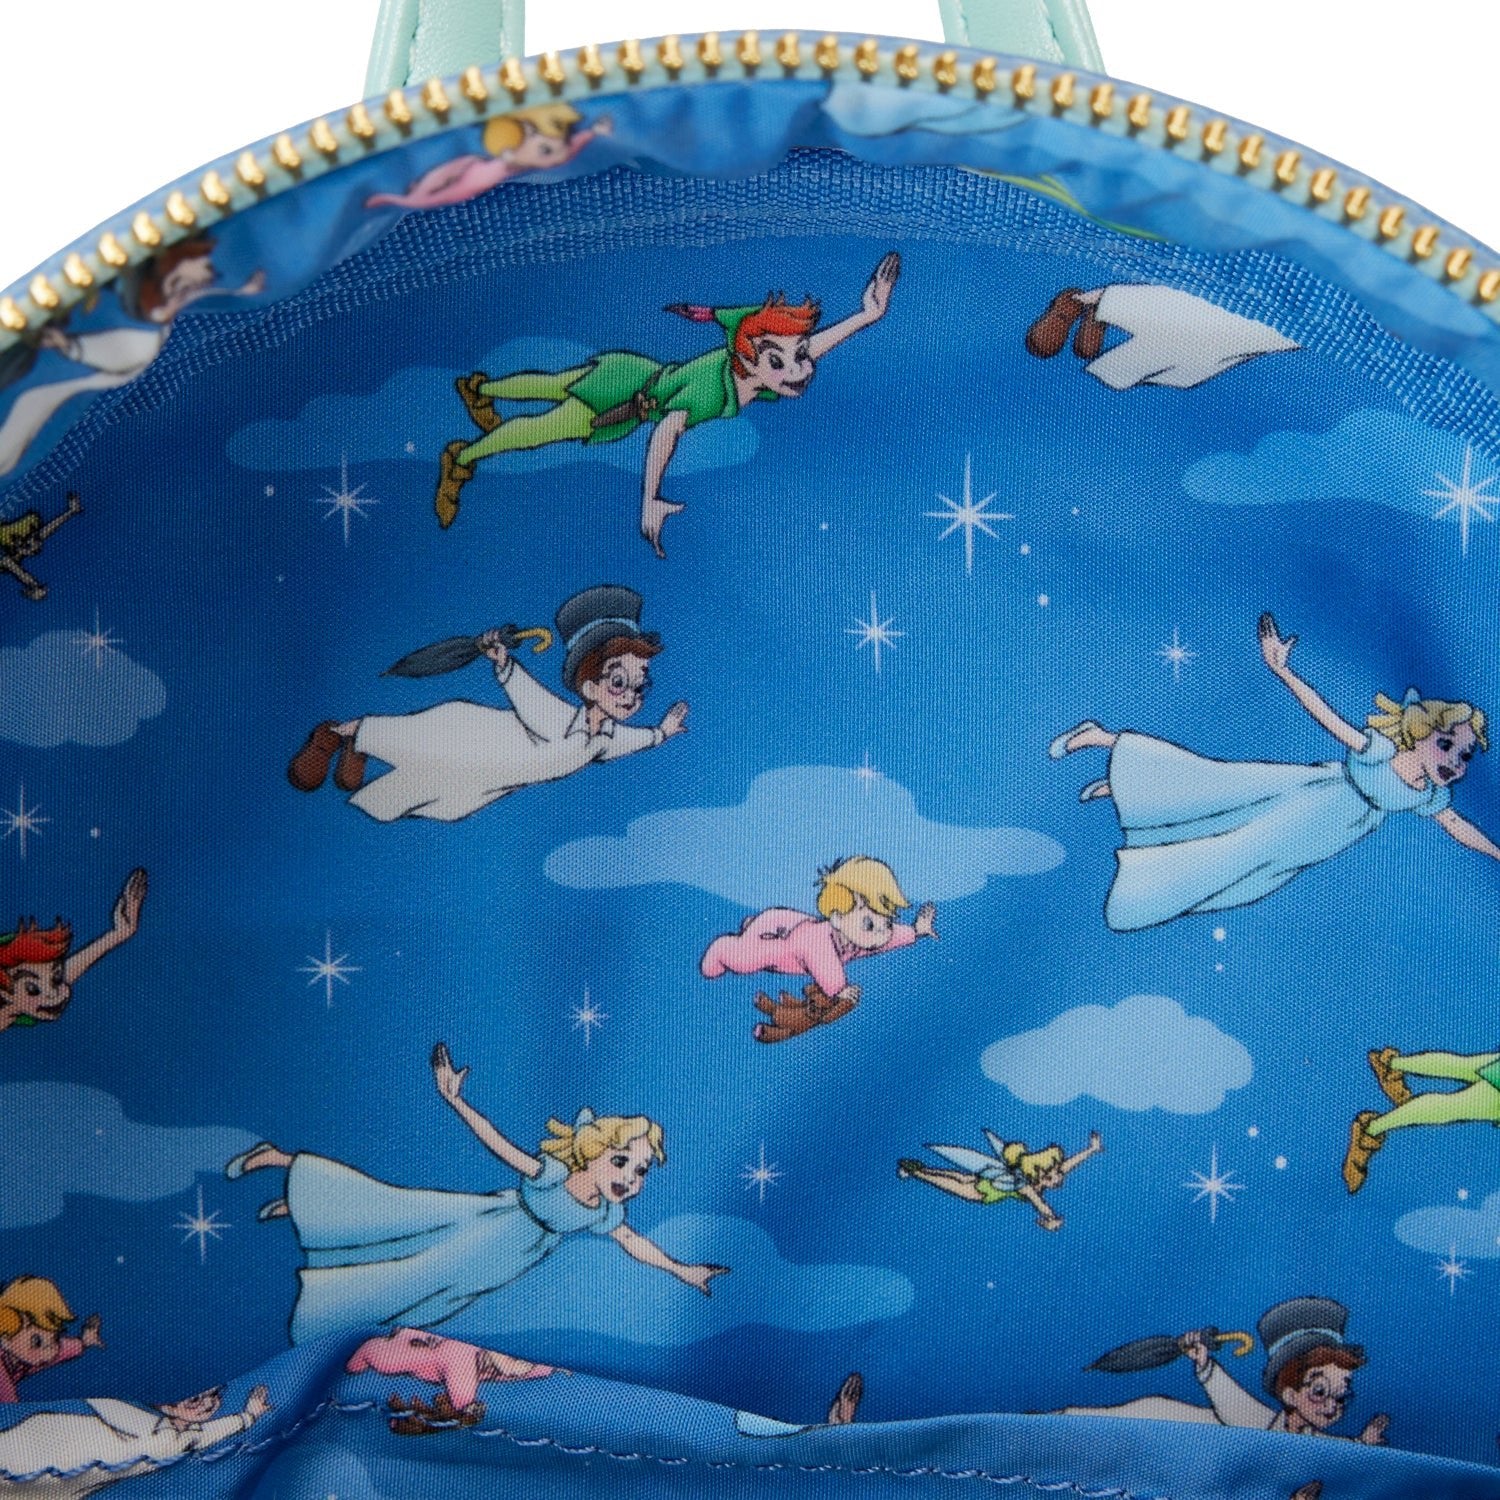 Loungefly x Disney Peter Pan You Can Fly Mini Backpack - GeekCore